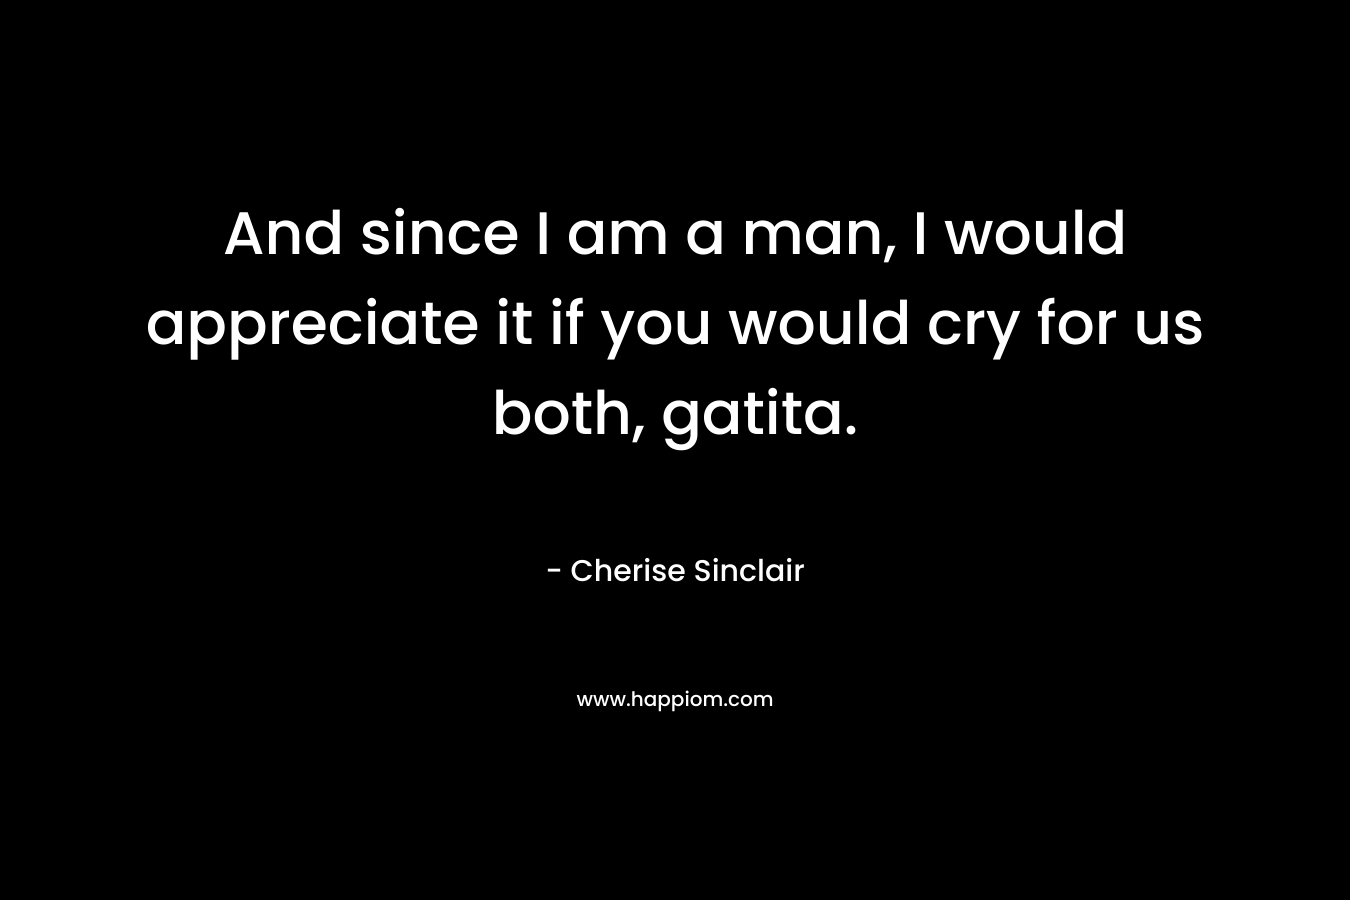 And since I am a man, I would appreciate it if you would cry for us both, gatita. – Cherise Sinclair